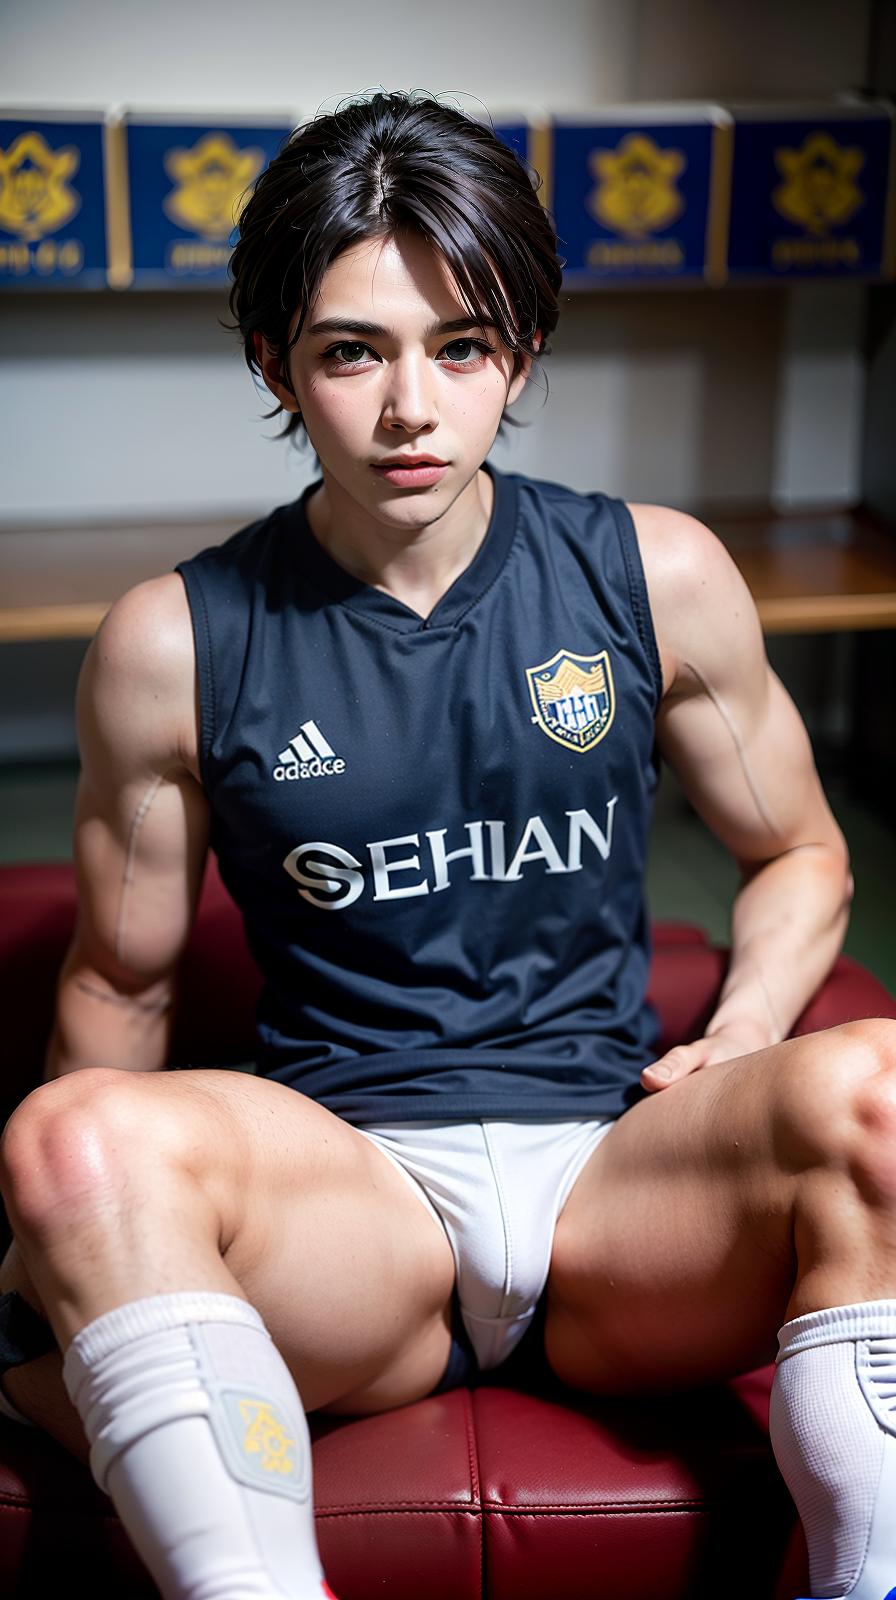  ultra high res, (photorealistic:1.4), raw photo, (realistic face), realistic eyes, (realistic skin), <lora:XXMix9_v20LoRa:0.8>, handsome, (male:2), (young male soccer players:1.3), (pompadour:1.1), (white briefs:1.3), (sleeveless:1.2), spike shoes, (soccer shin guards:1.3), young, , (torn blue and white stripes uniform:1.1), sitting posture, (spread legs:1.1), real skin, (sexy posing:1.3), hot guy, (muscular:1.3), (naked:1.1), (bulge:1.1), trained calves, thigh, realistic, lifelike, high quality, photos taken with a single-lens reflex camera, (looking at the camera:1.2), (locker room:1.1)